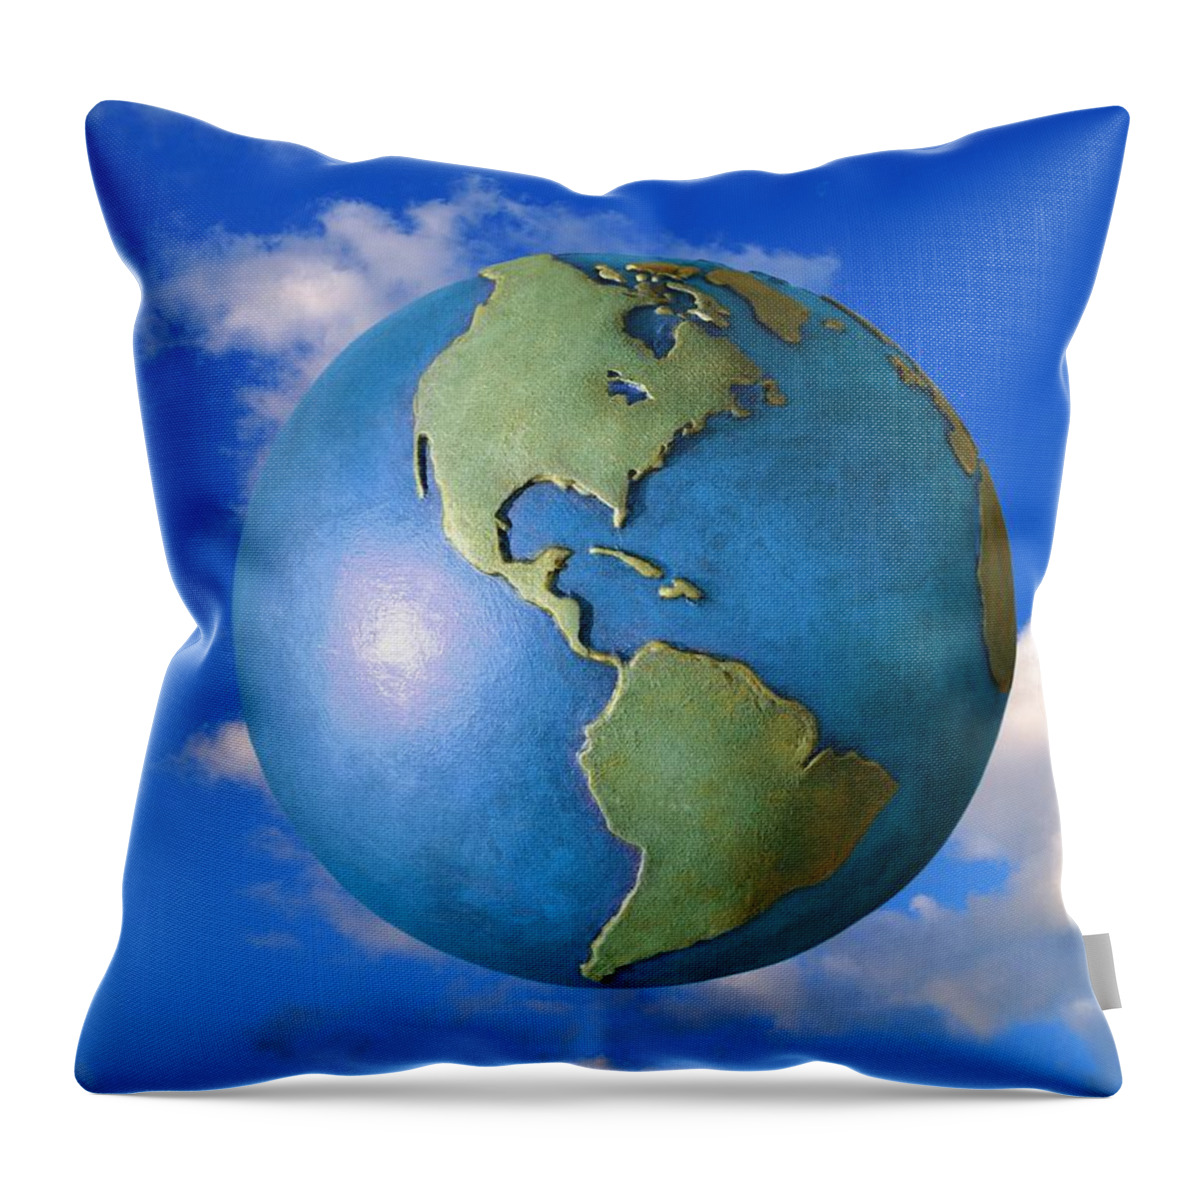 Clouds Throw Pillow featuring the photograph A Globe In The Sky by Don Hammond